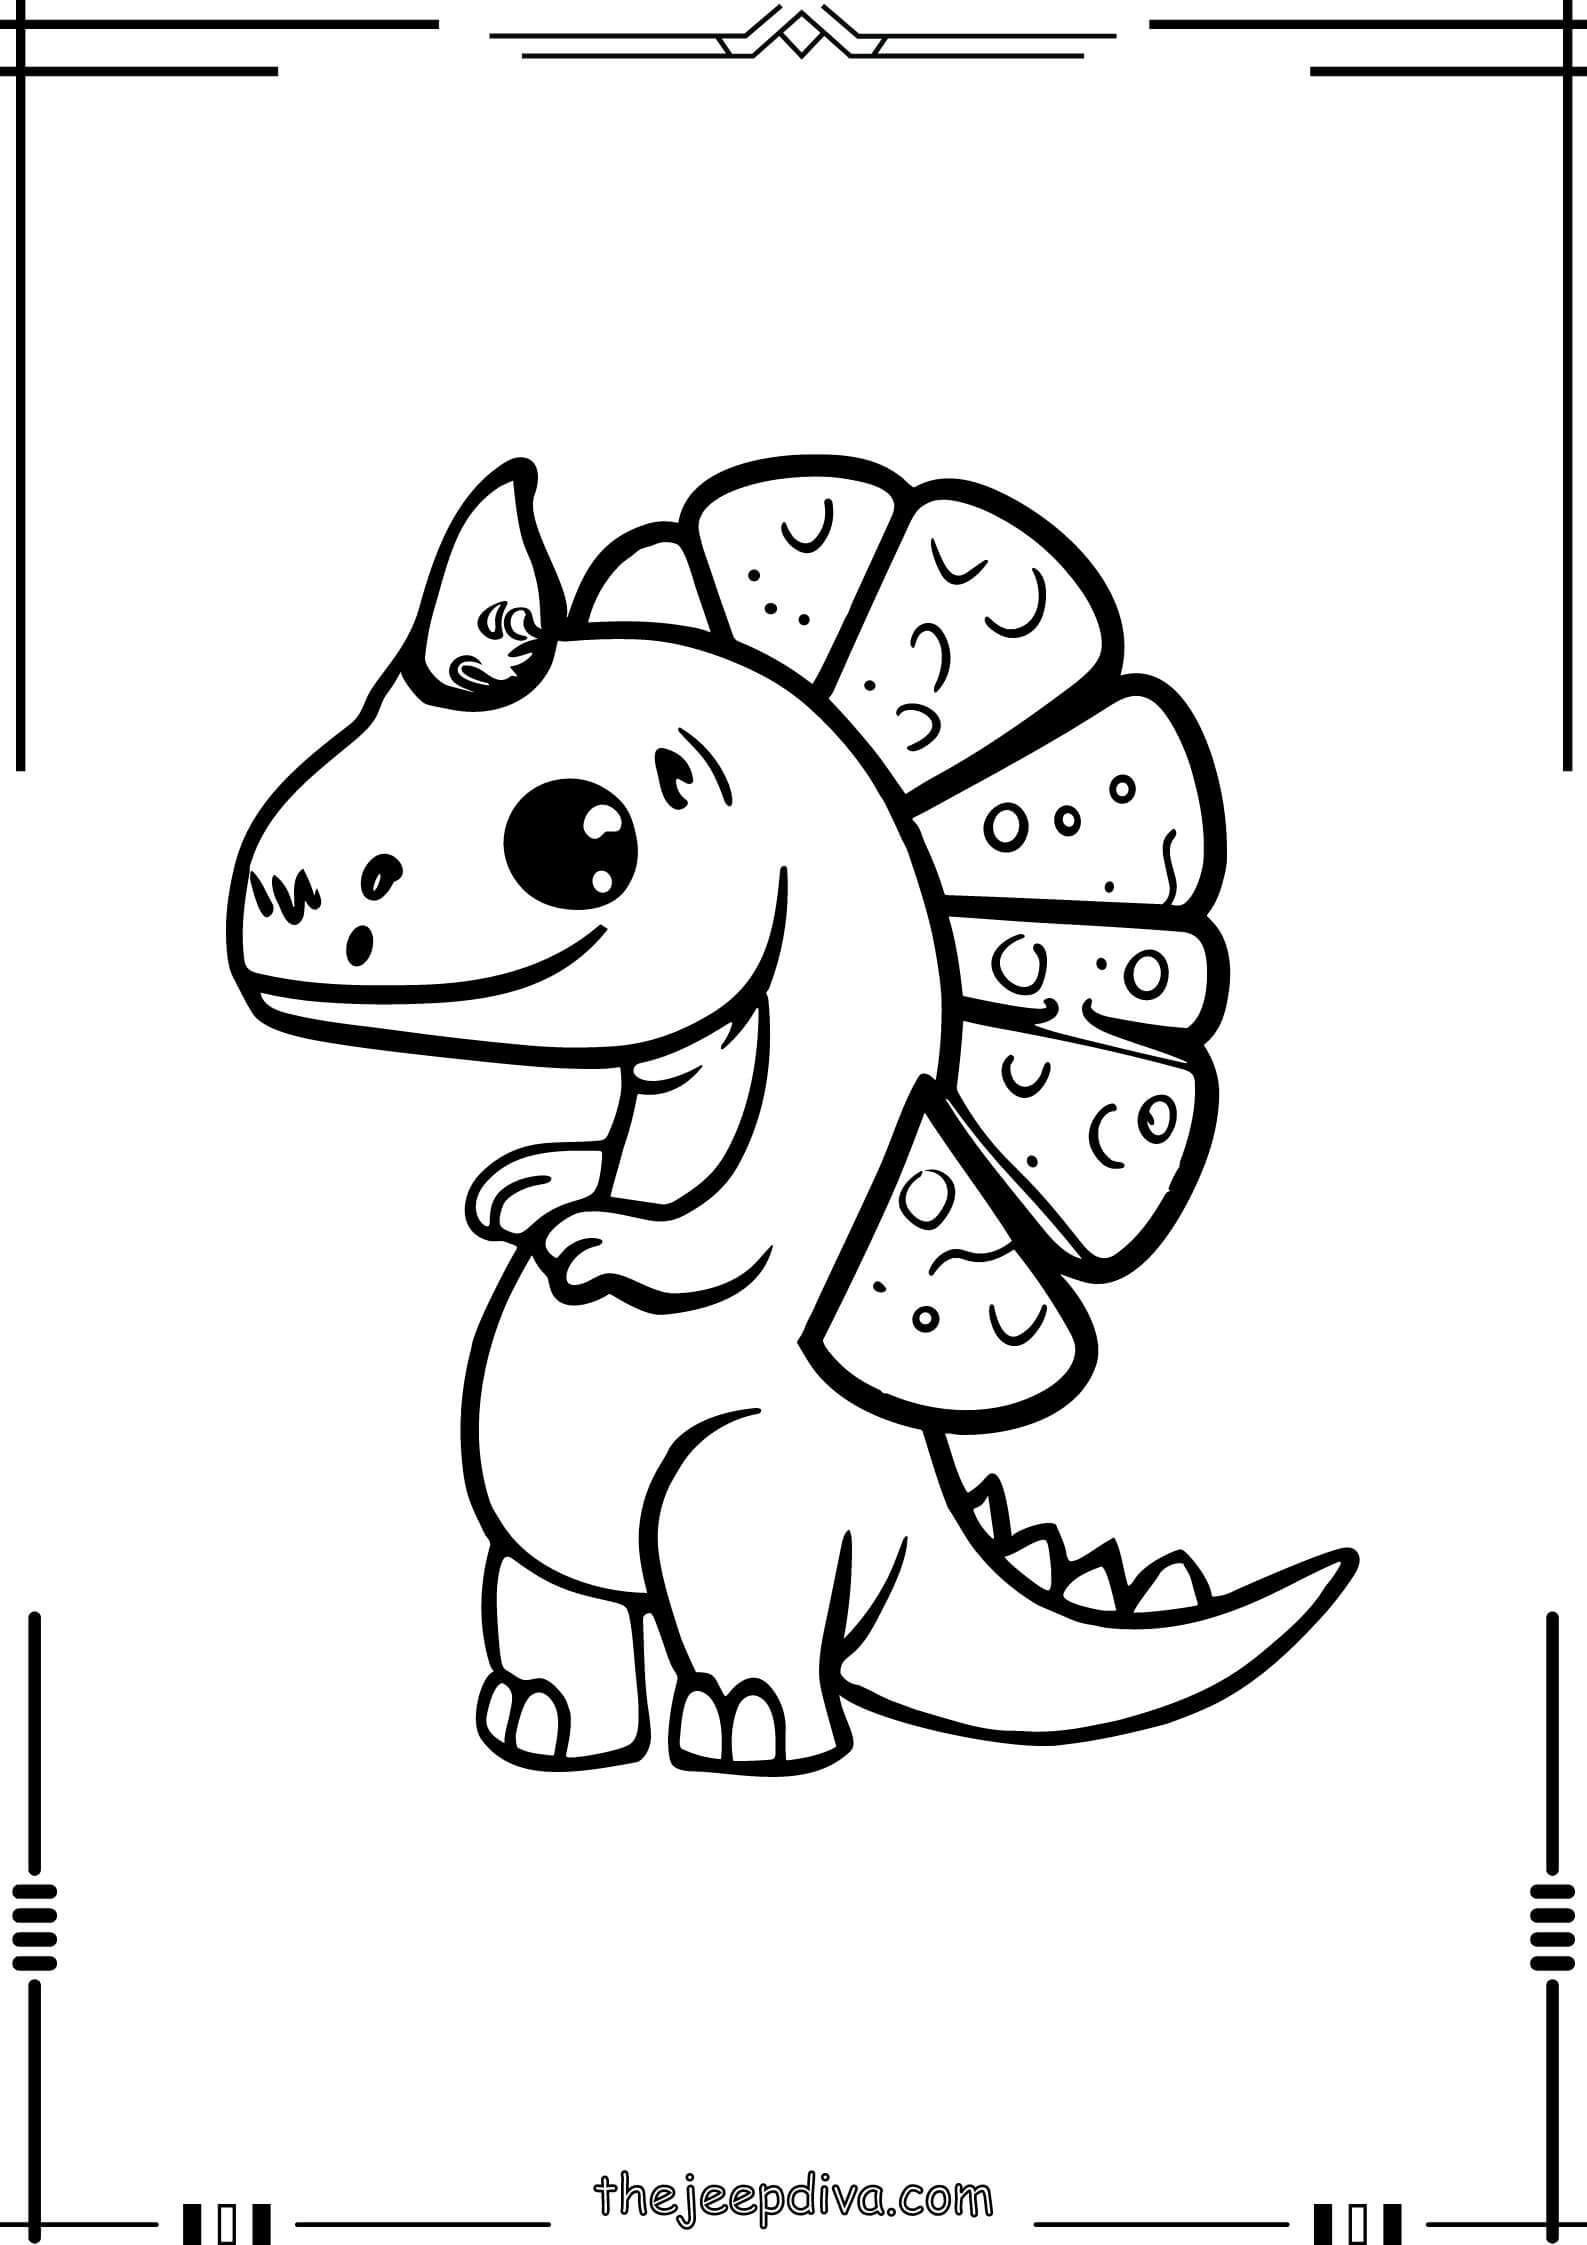 Dinosaur-Colouring-Pages-Easy-1